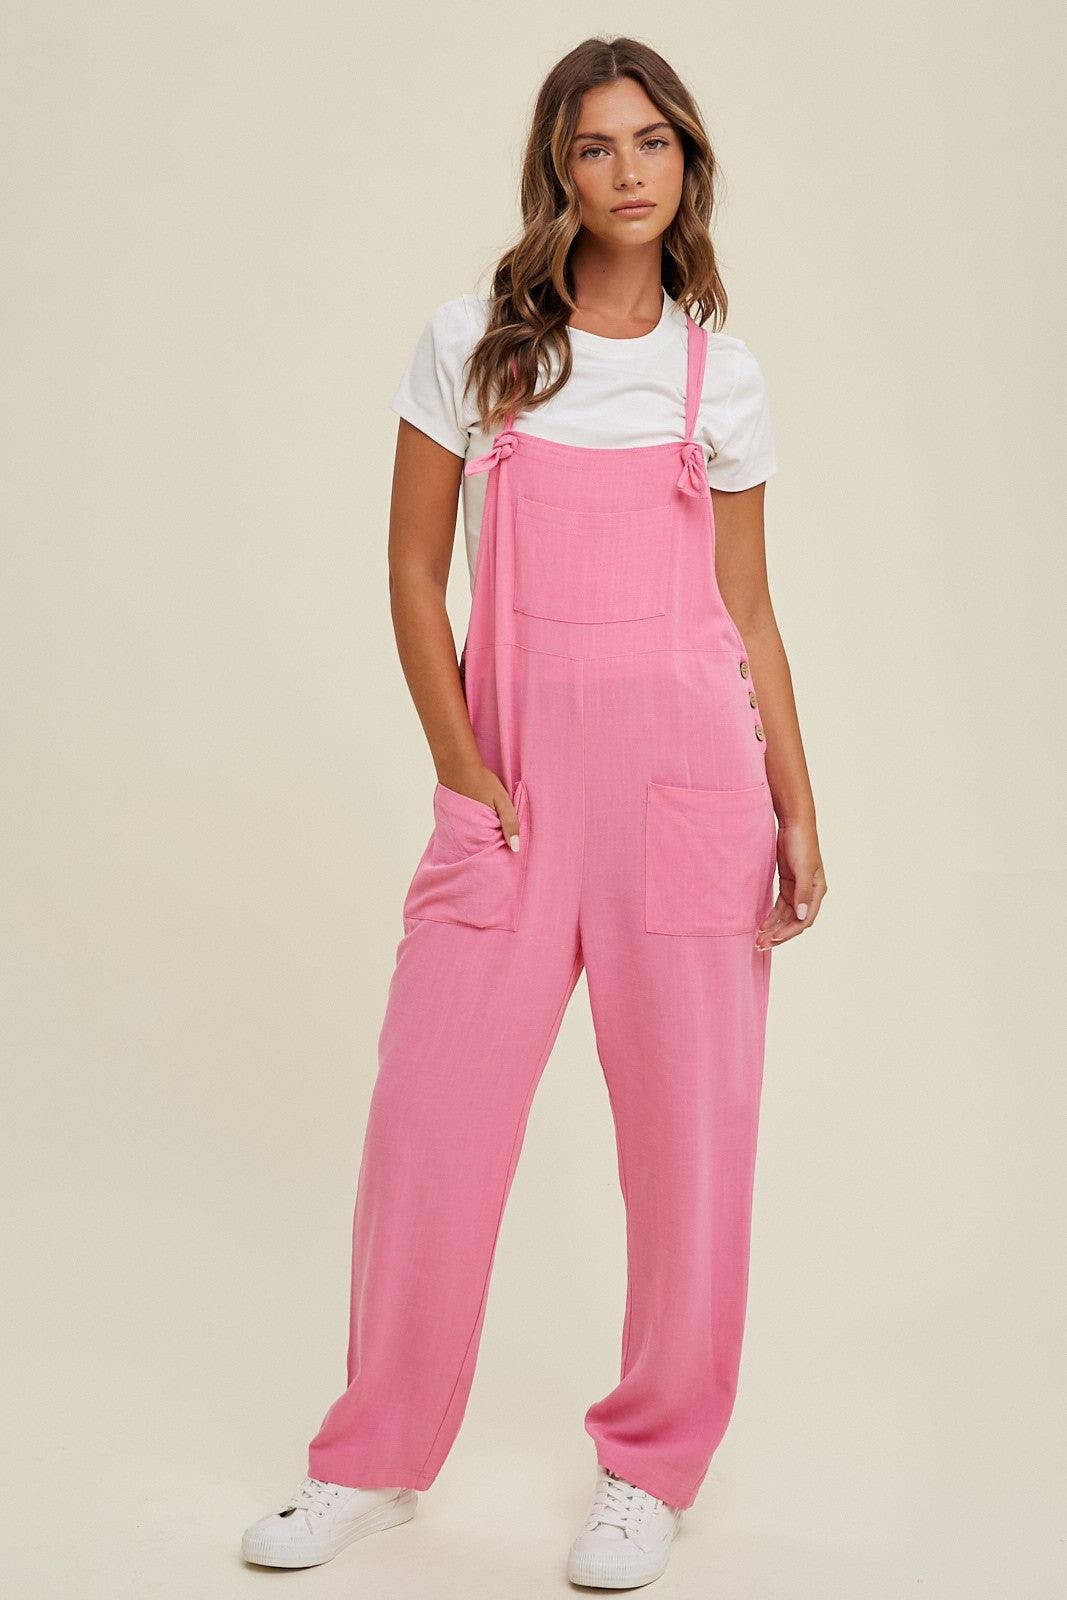 LOVELY IN LINEN OVERALLS , Jumpsuits & Rompers , It's NOMB , LINEN JUMPSUIT, PINK JUMPSUIT, PINK LINEN OVERALLS , It's NOMB , itsnomb.com